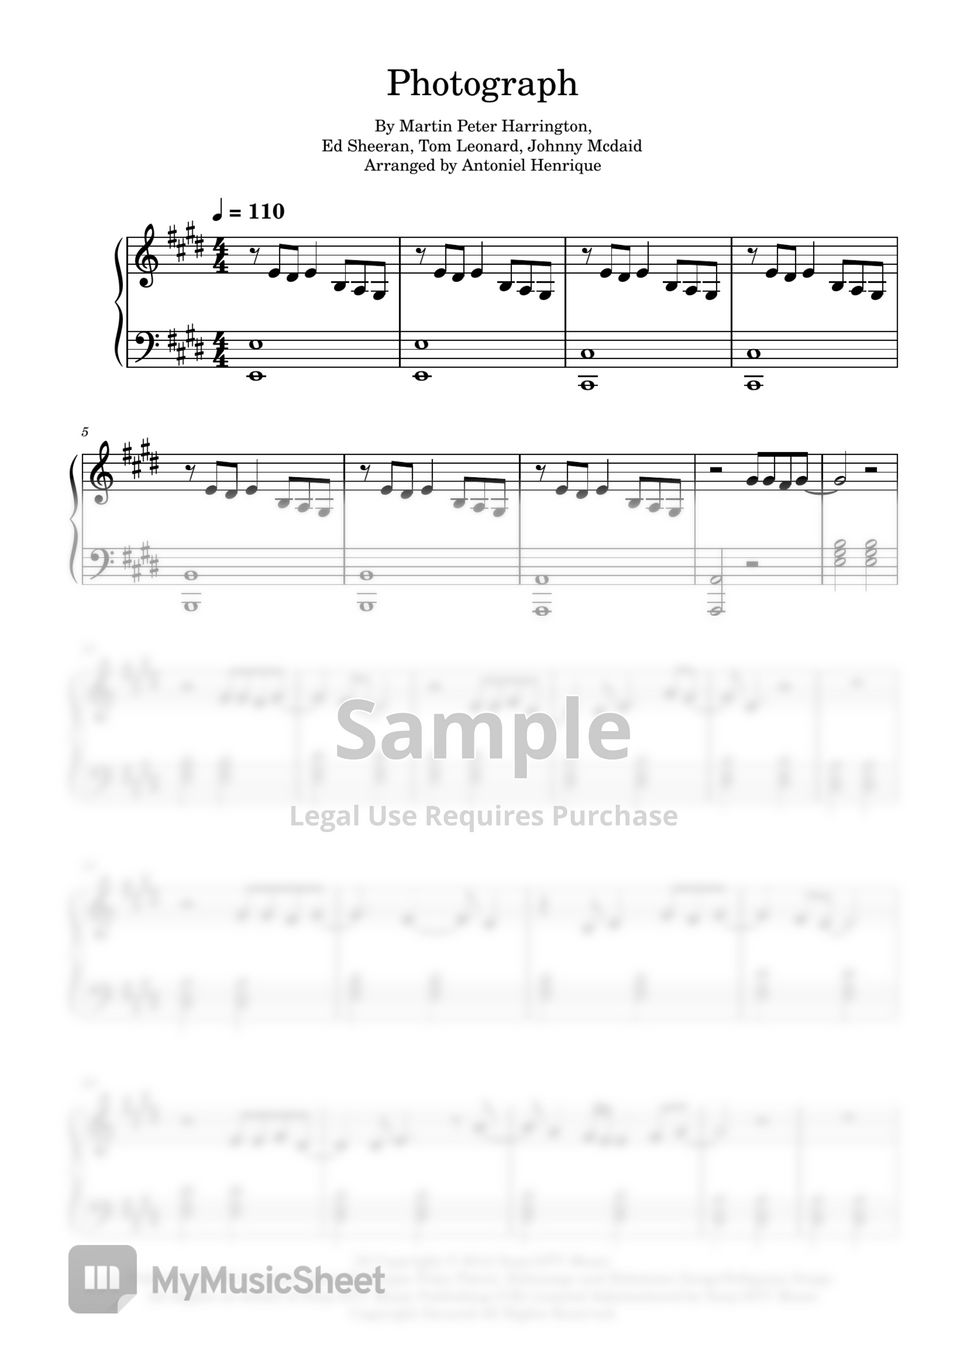 Ed Sheeran - Photograph by Sheet Music For Download